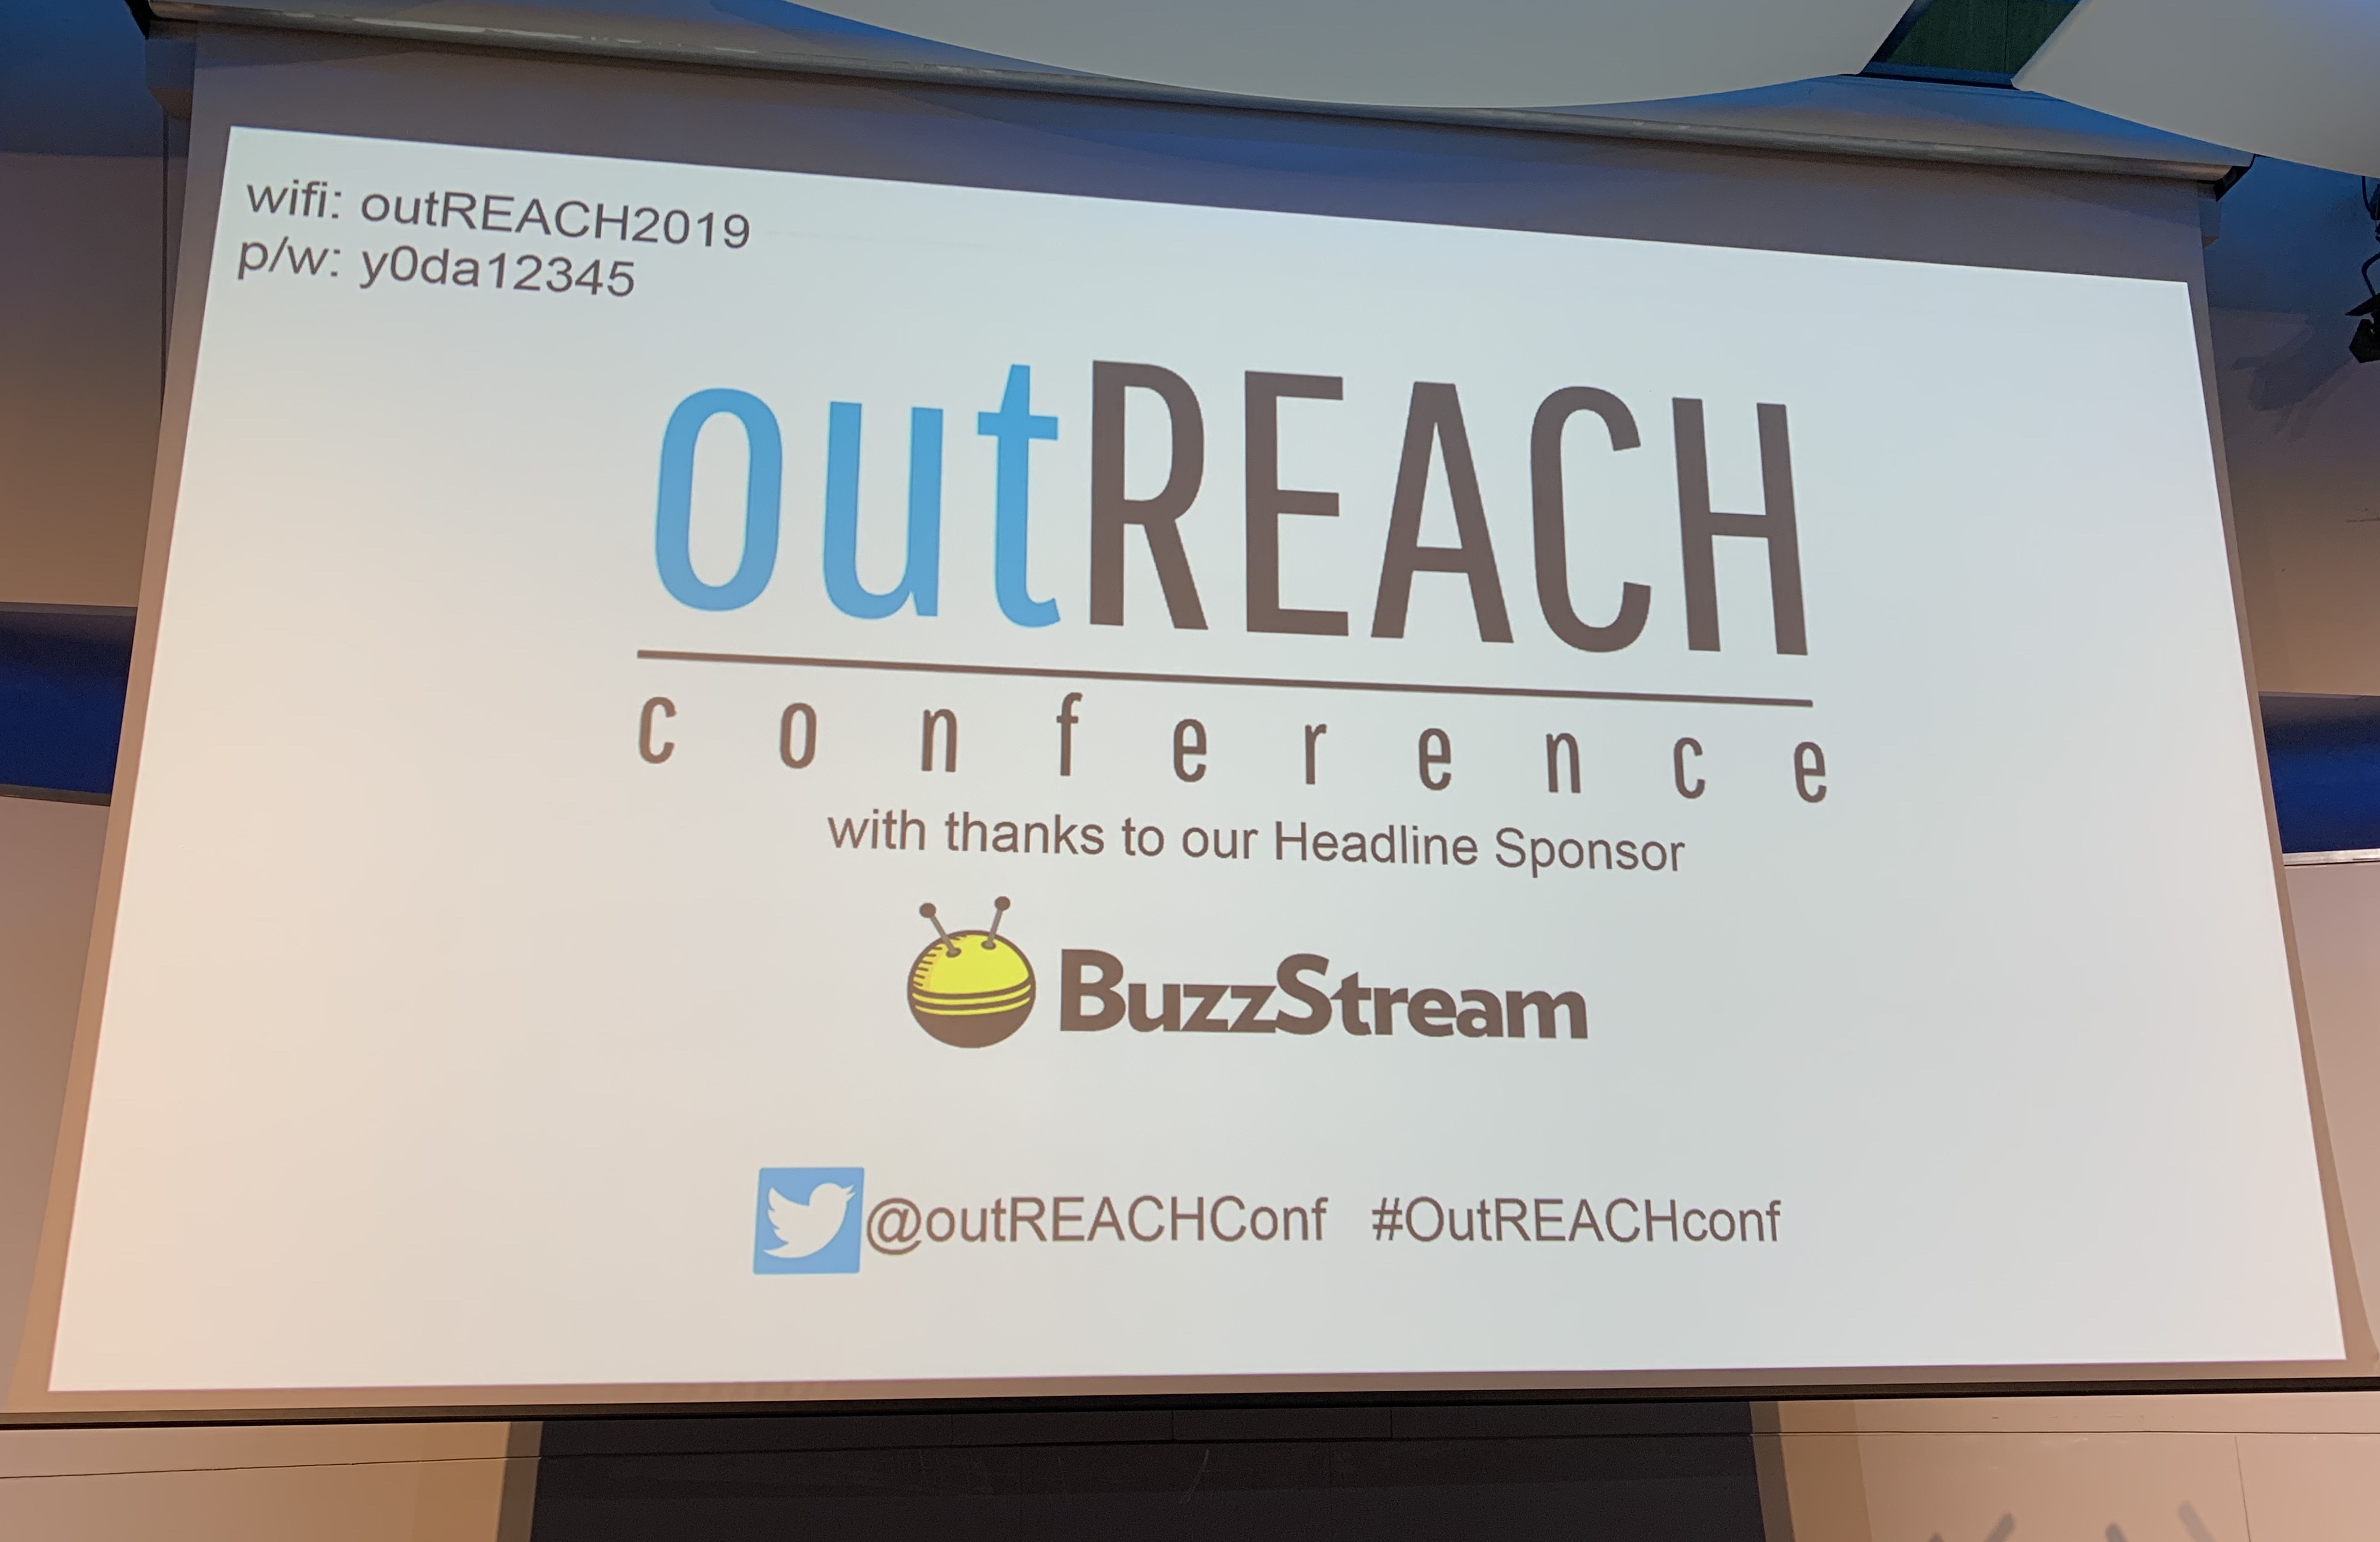 outREACH conference in London